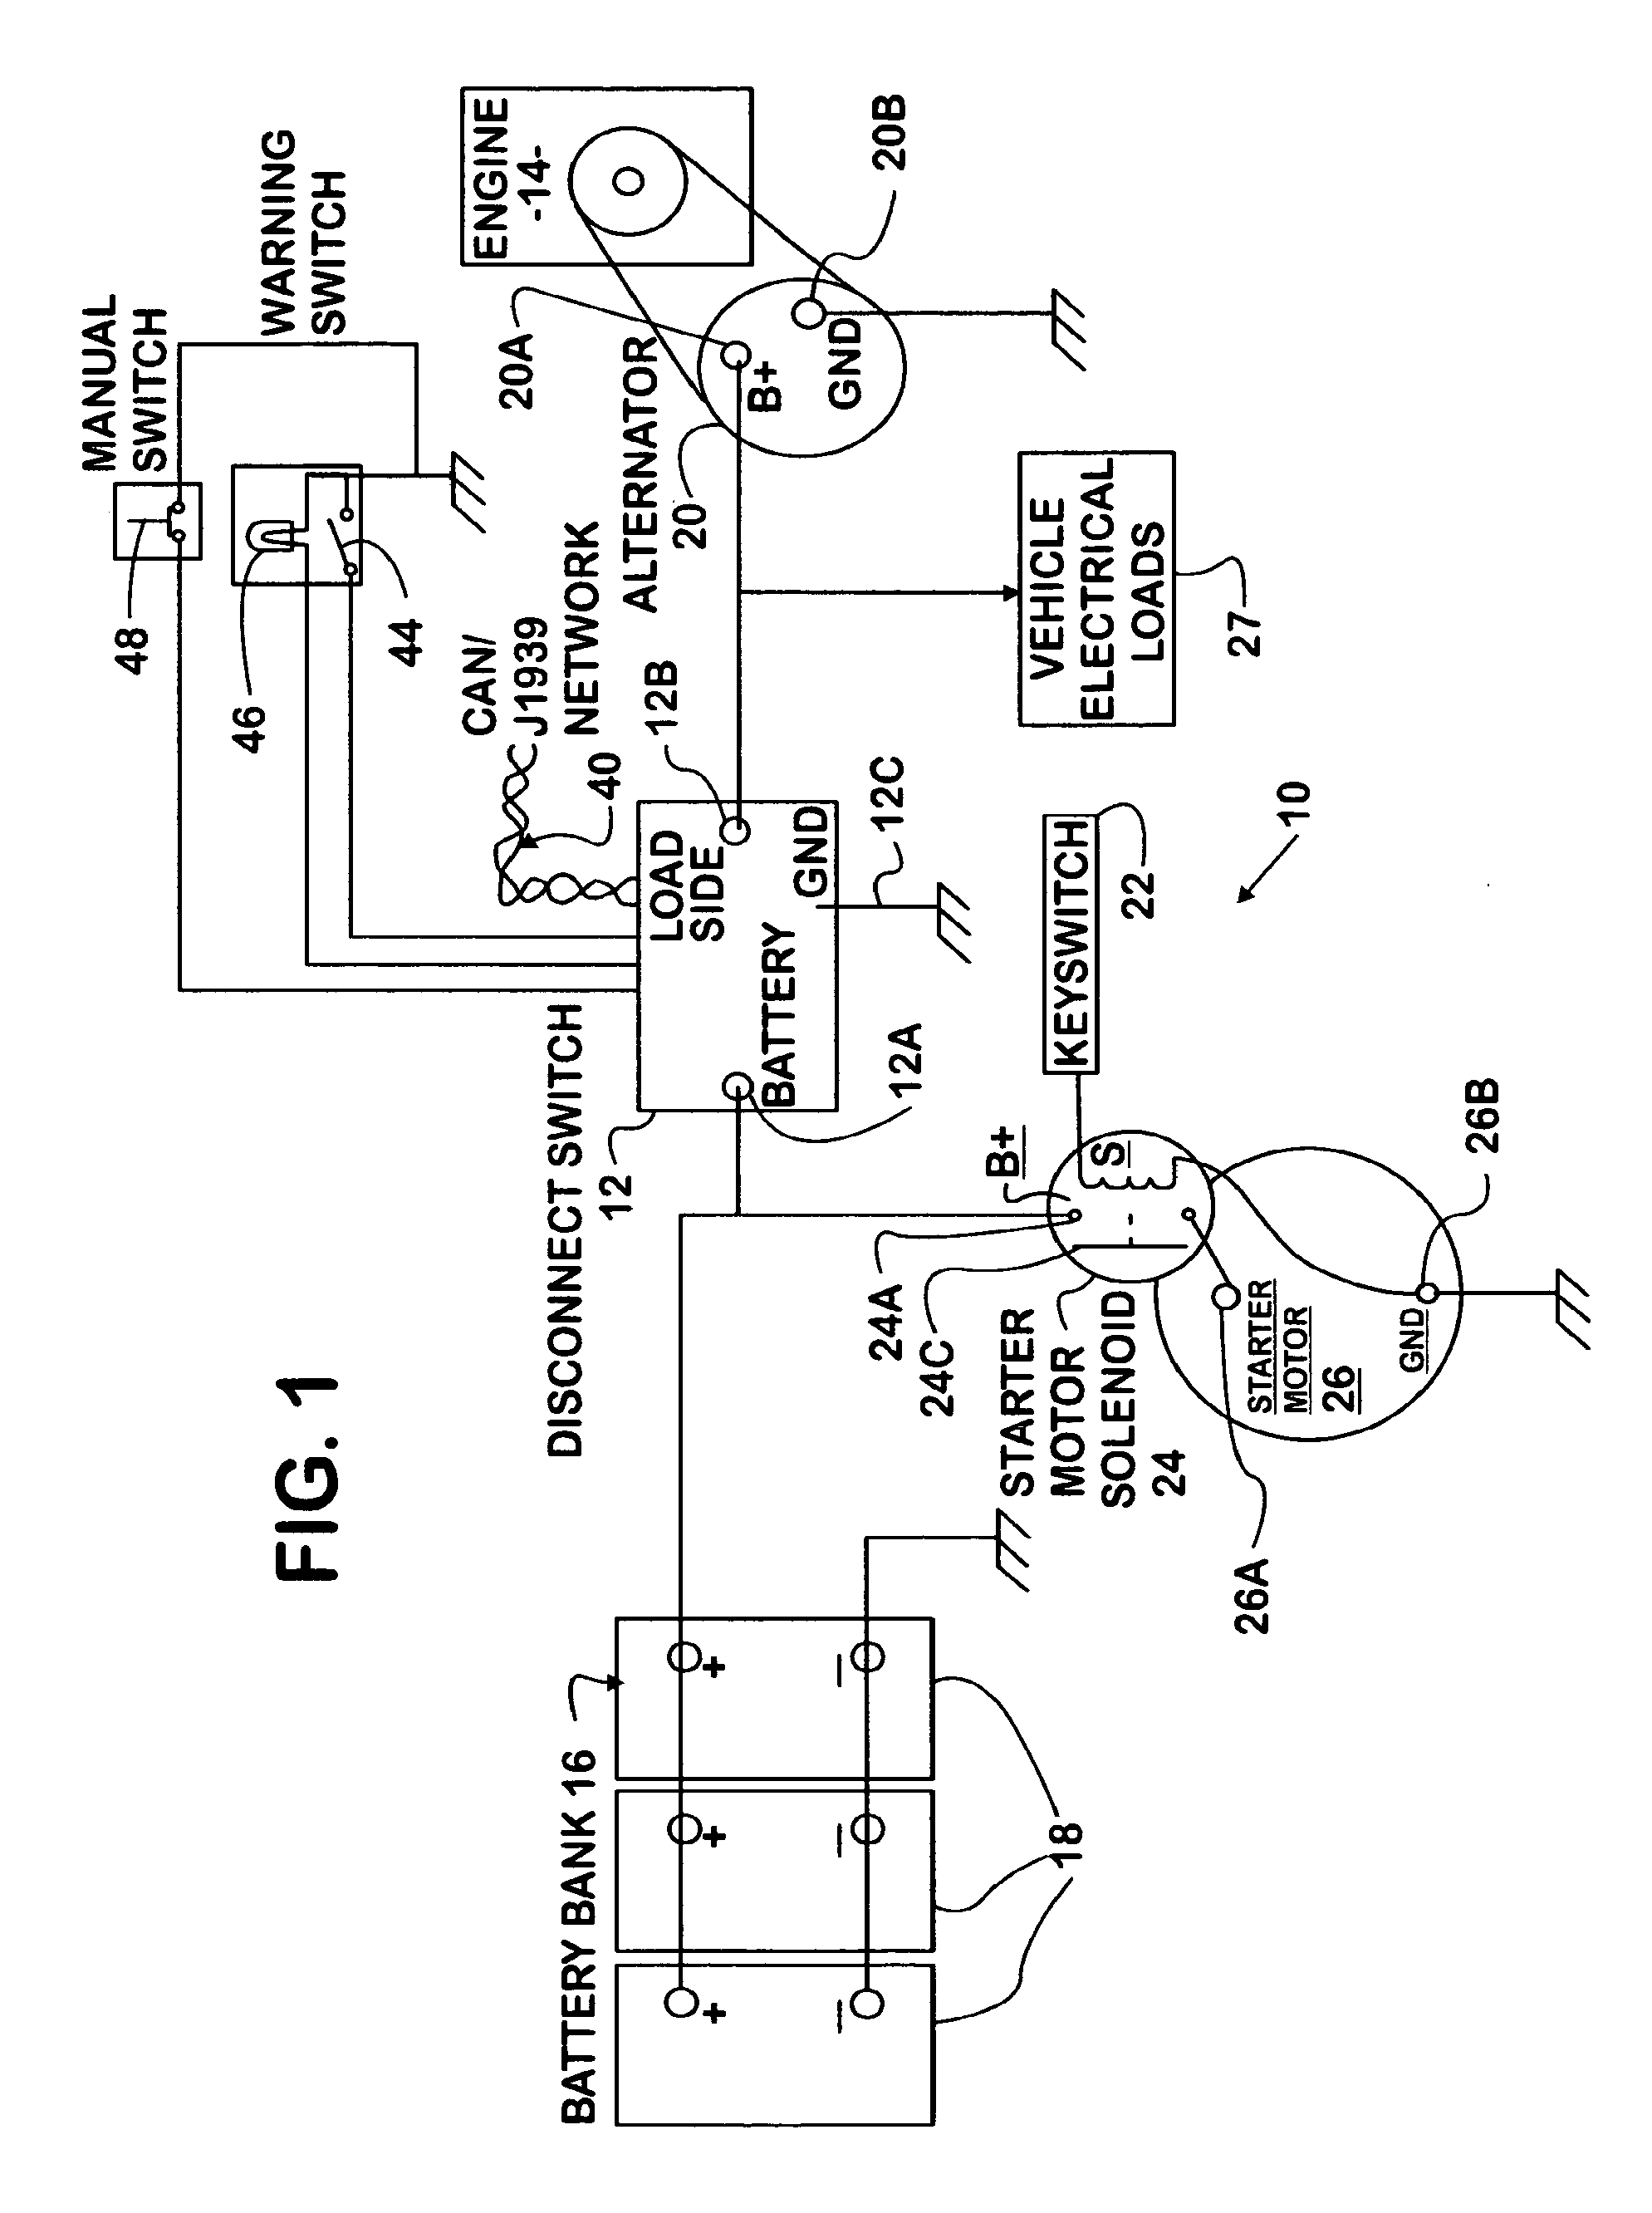 Motor vehicle battery disconnect circuit having electronic disconnects